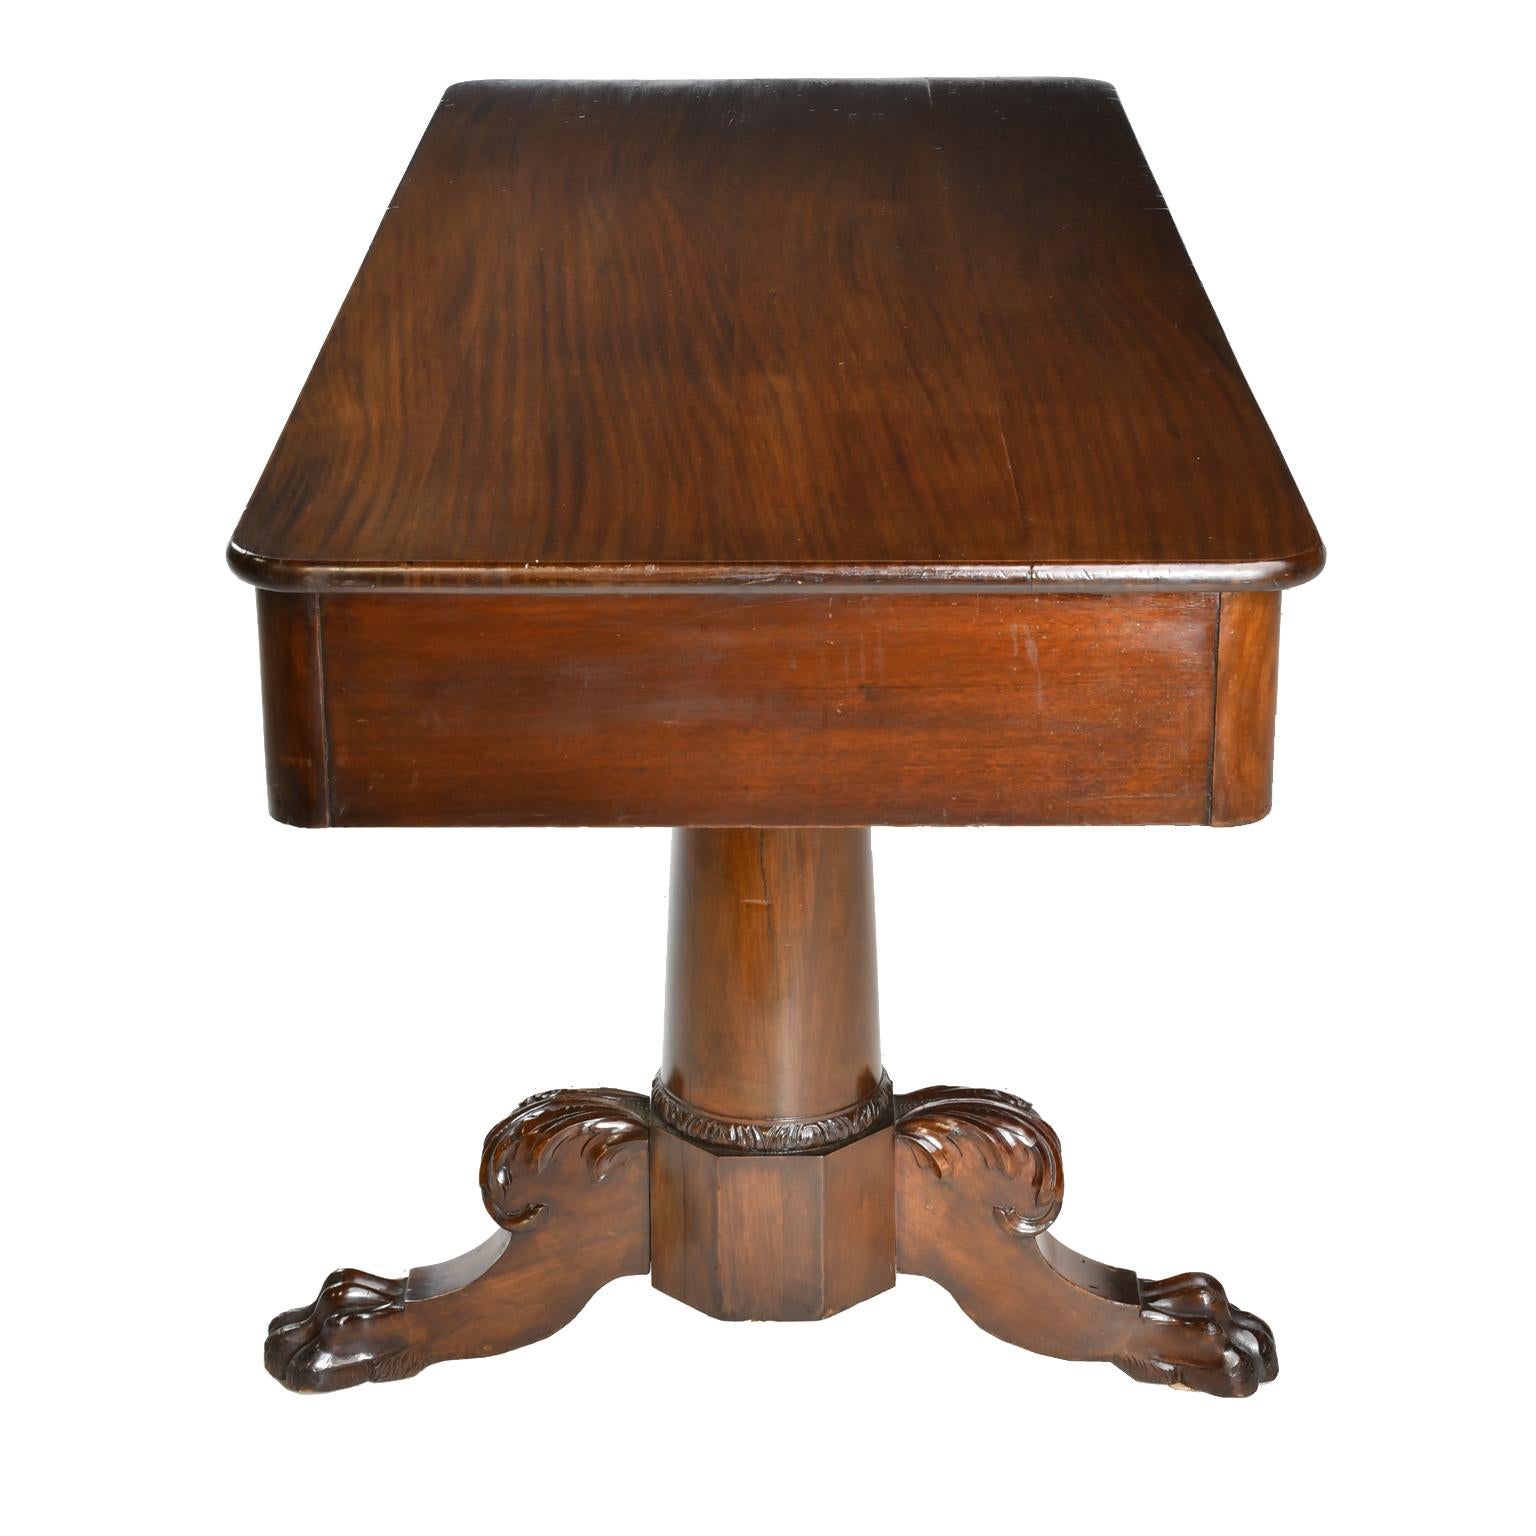 Antique Classical American Philadelphia Desk in Mahogany with Double Pedestal For Sale 2